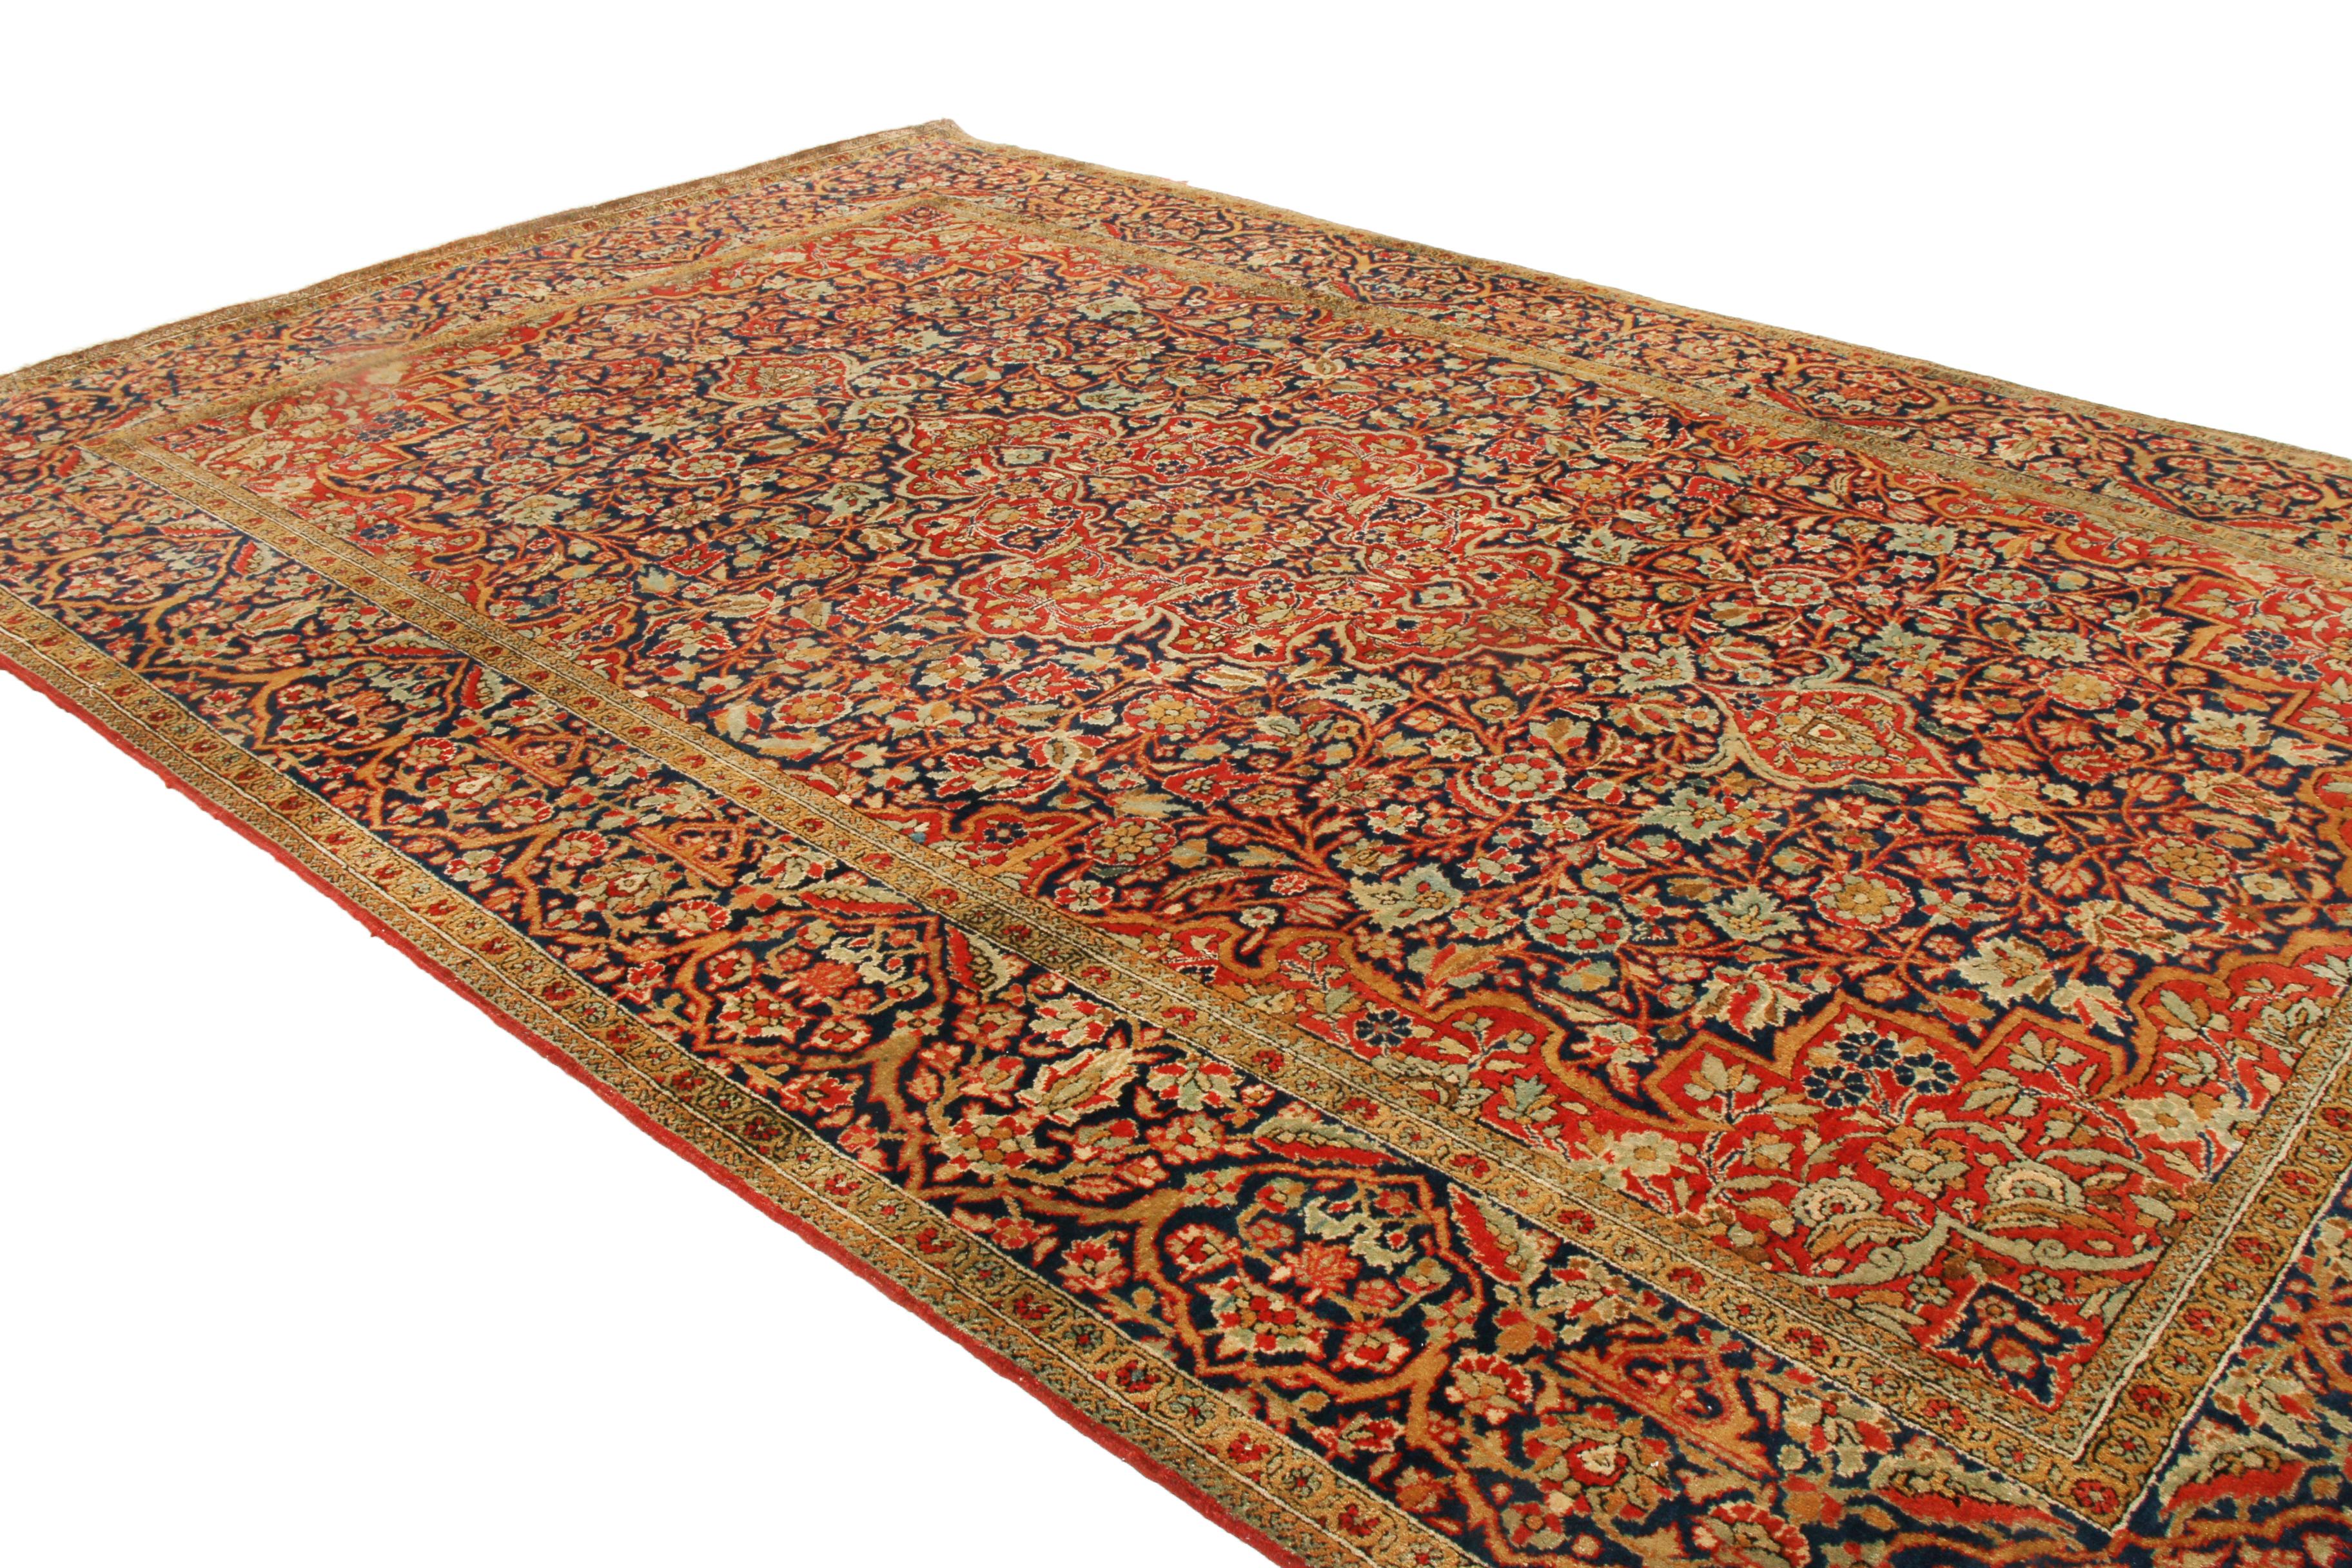 Originating from Persia between 1900-1910, this antique traditional Persian rug is hand knotted in naturally iridescent silk to complement an extremely Fine all-over field design. The spacious central pattern includes lancet leaves and curvilinear